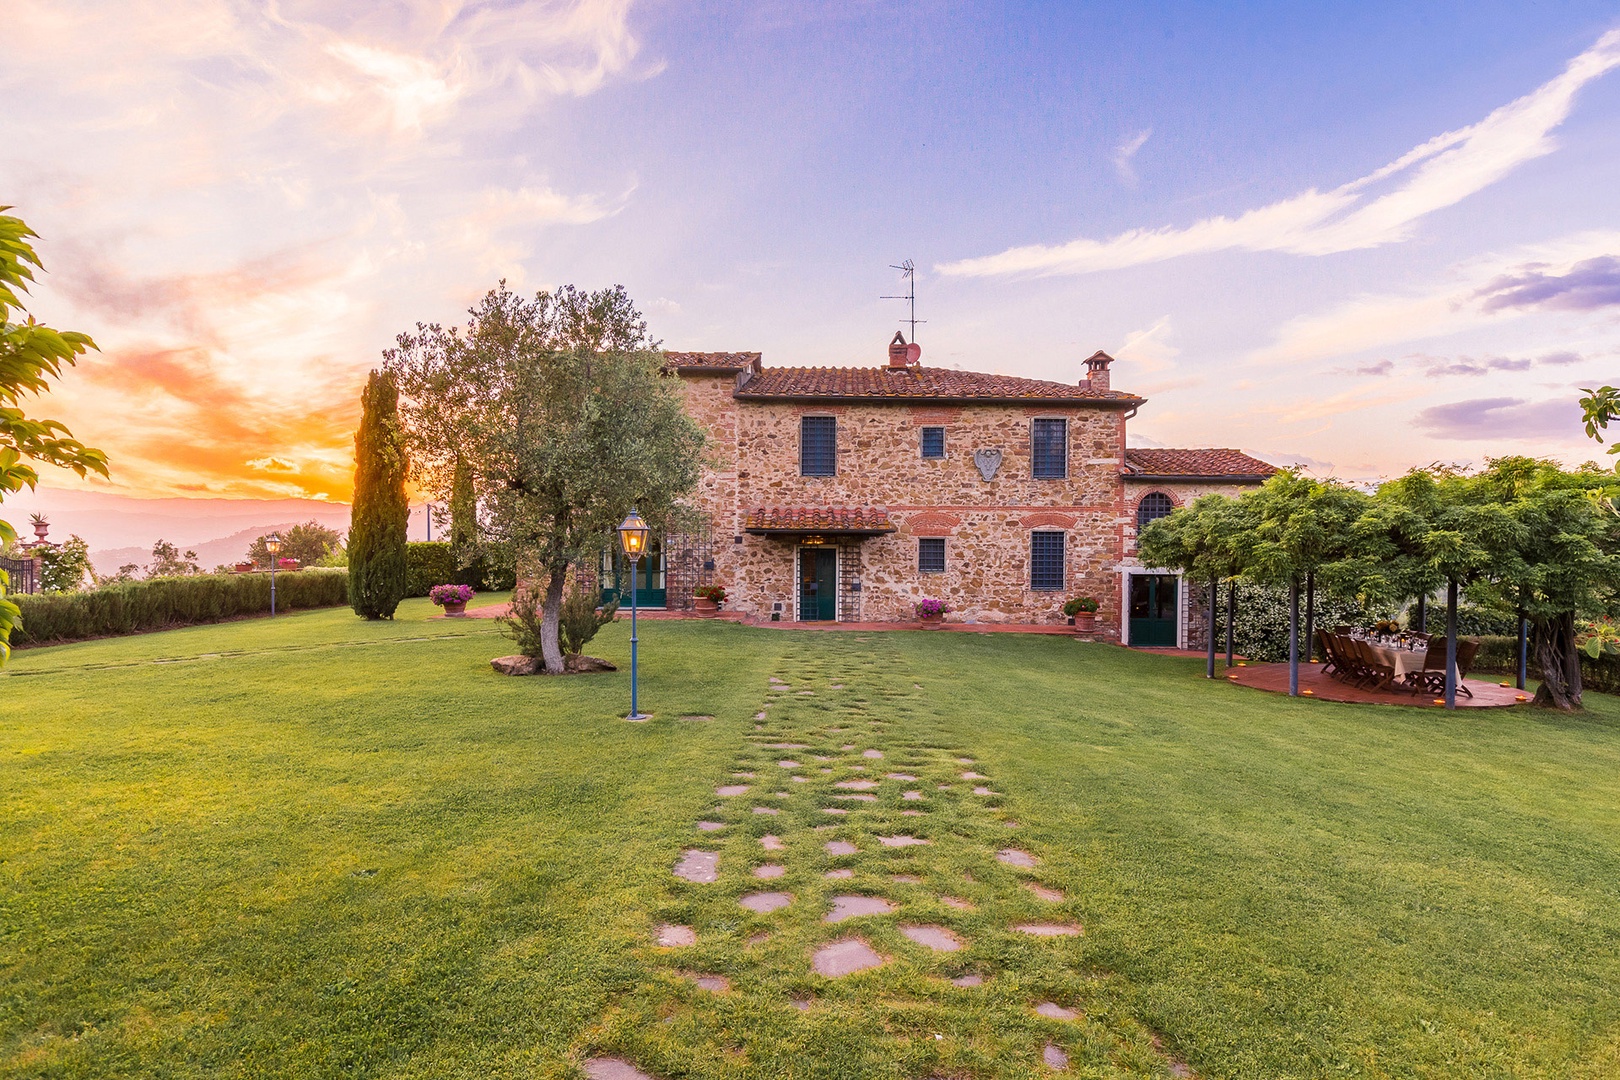 Regina is located on a large property with manicured landscaping. It adjoins olive groves.